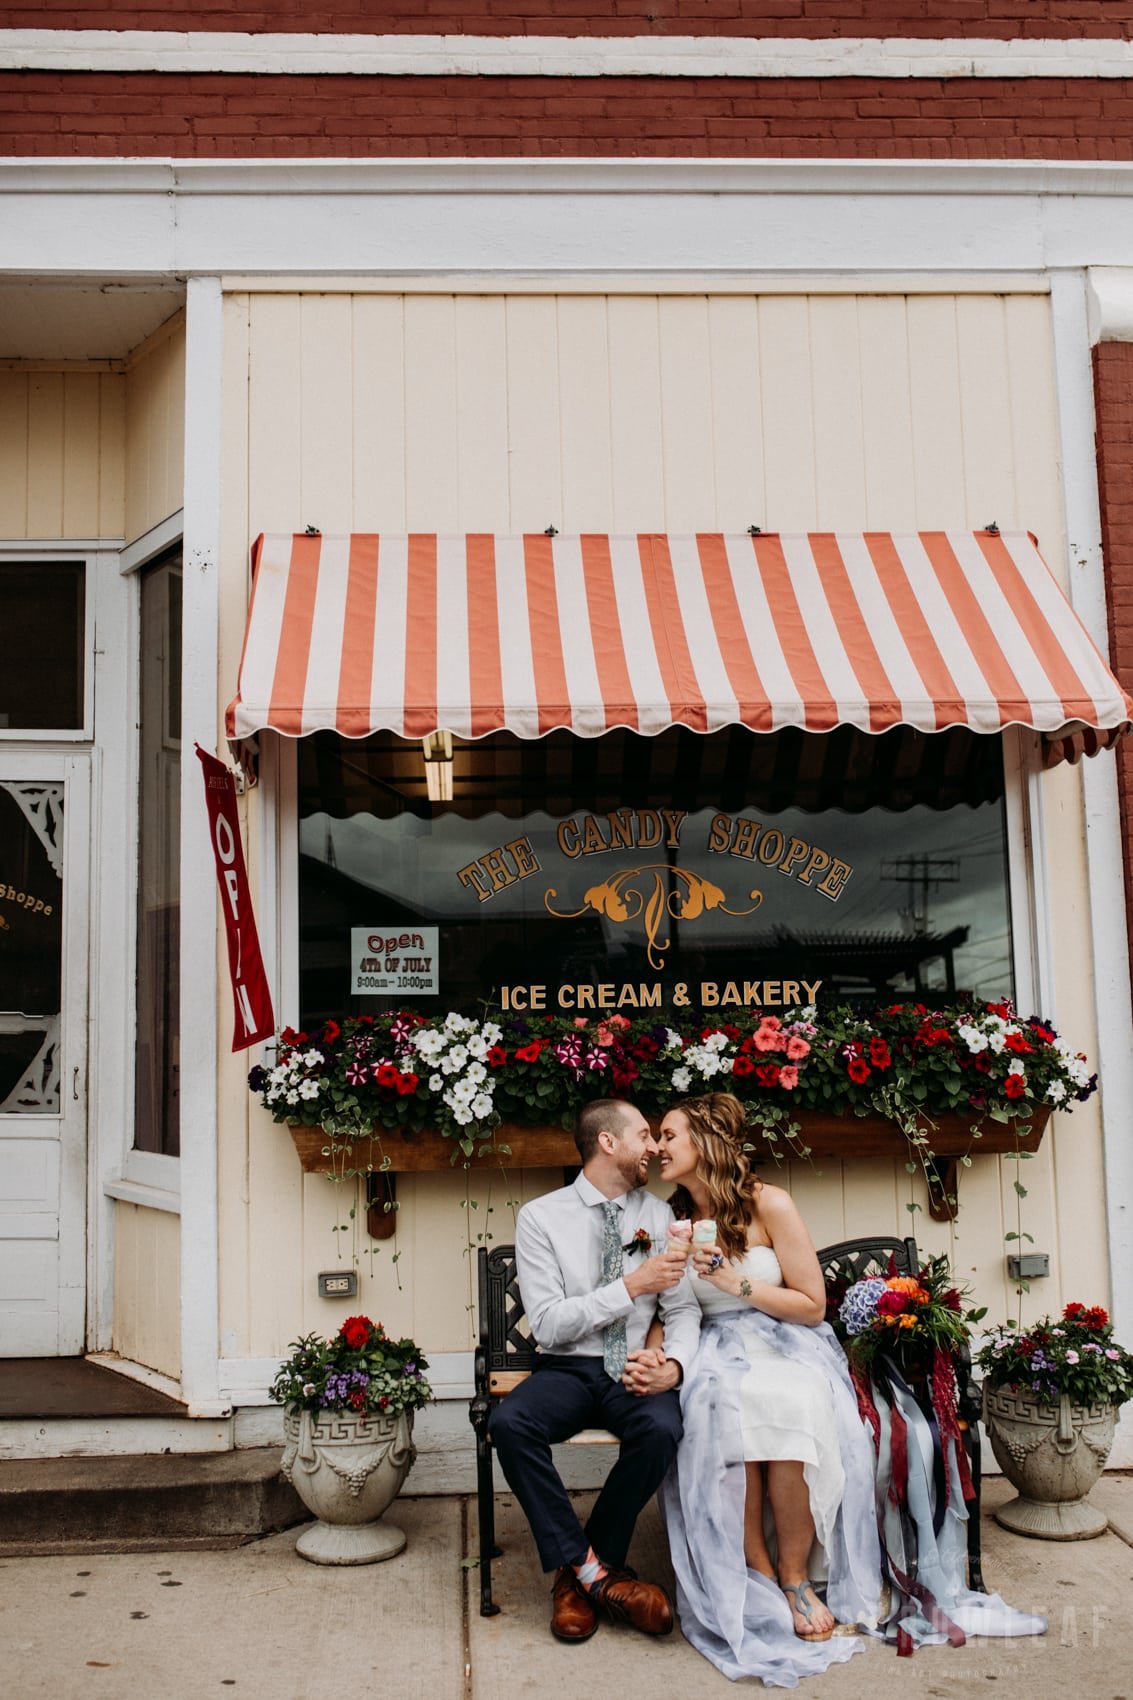 the-candy-shoppe-in-bayfield-wi-bride-groom-stop-for-ice-cream-302.jpg.jpg